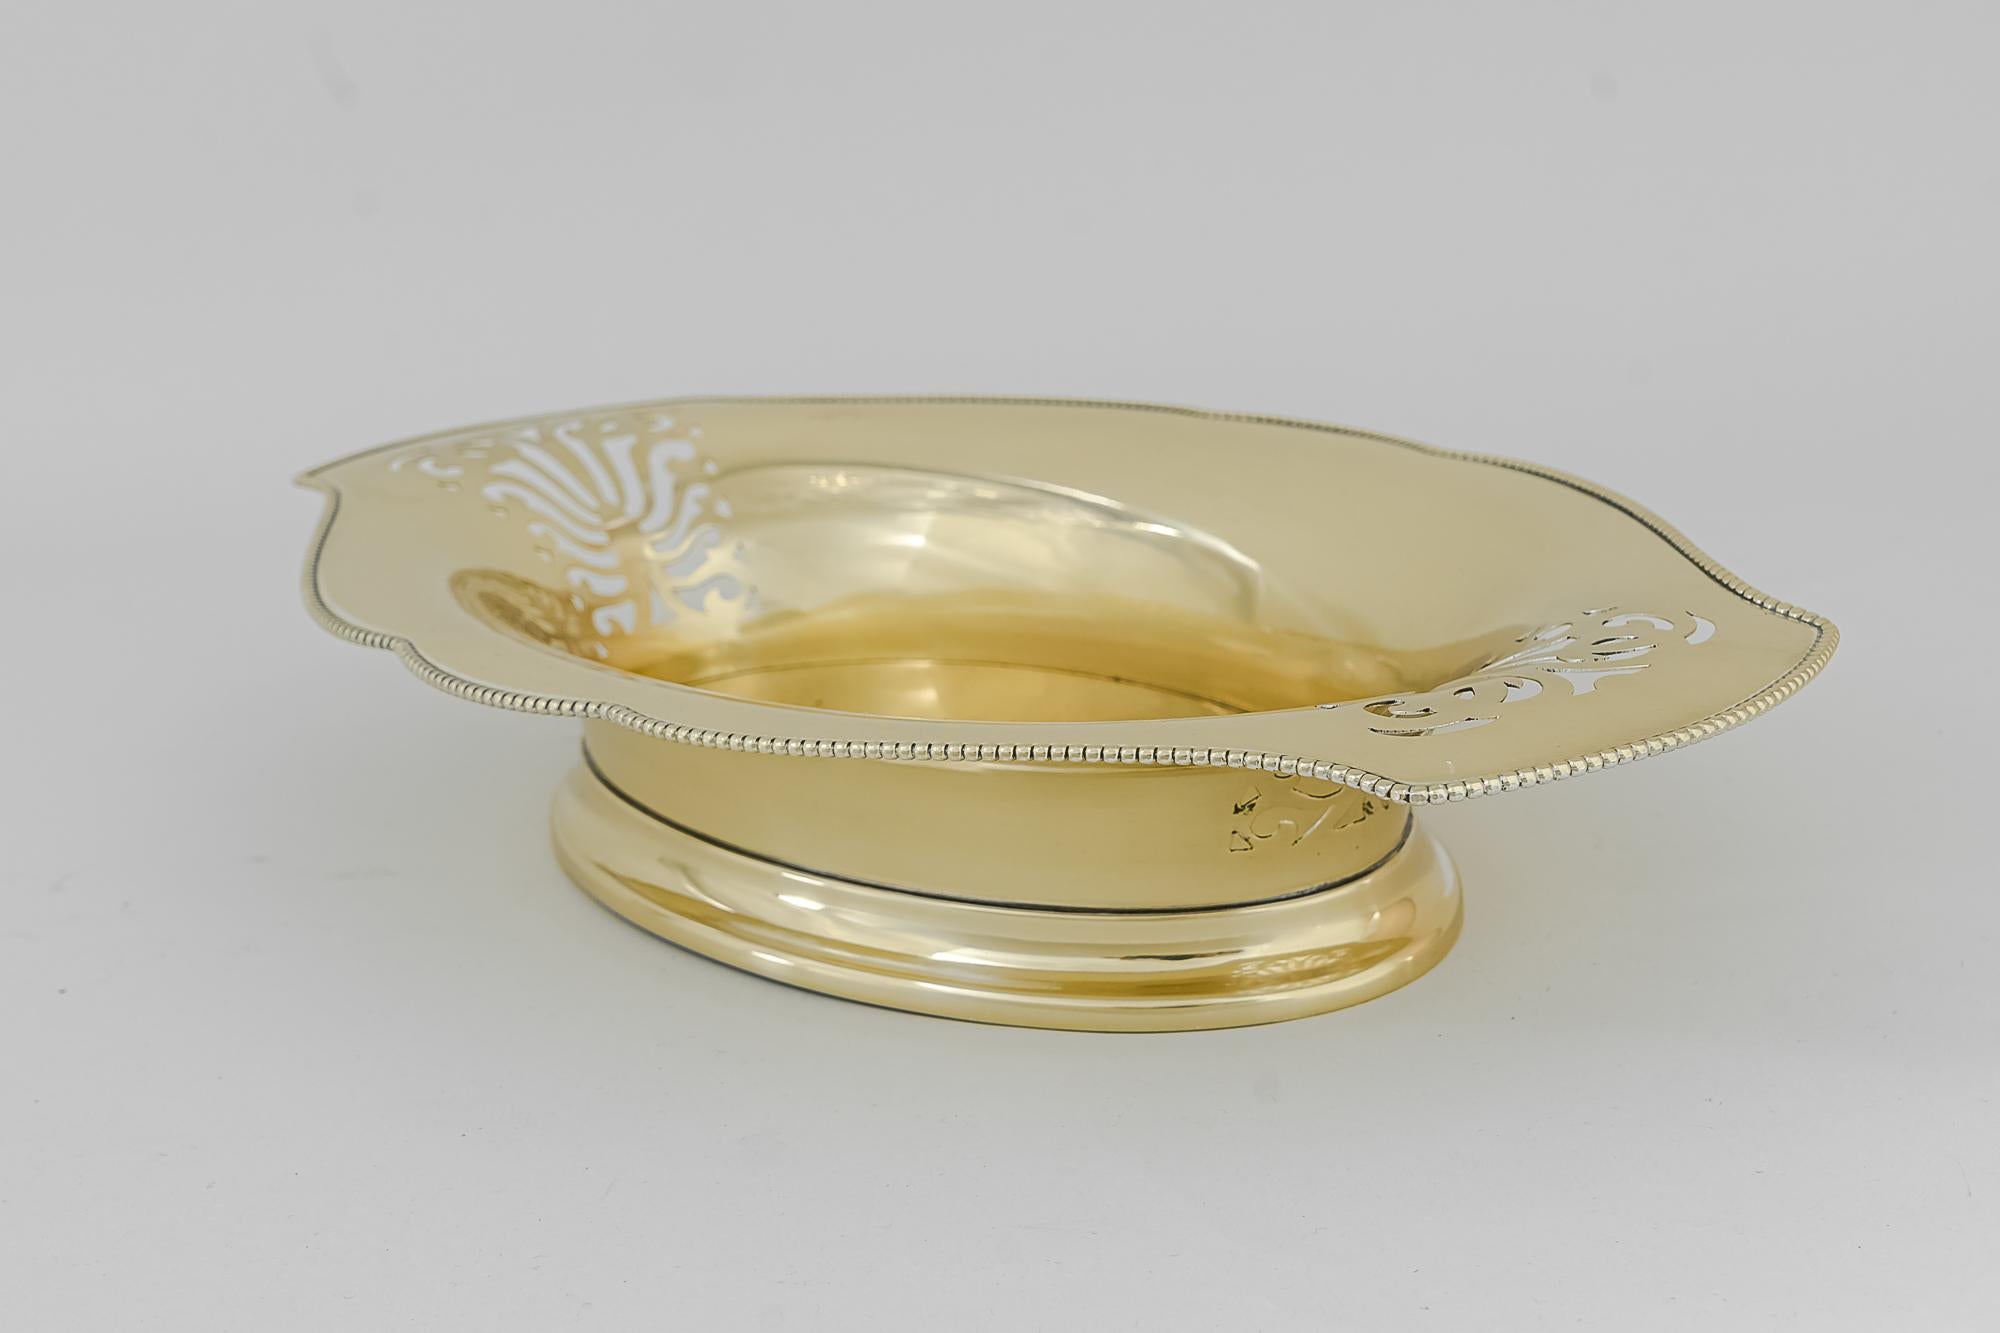 Art Deco fruit bowl, Vienna, 1920s
Polished and stove enamelled.